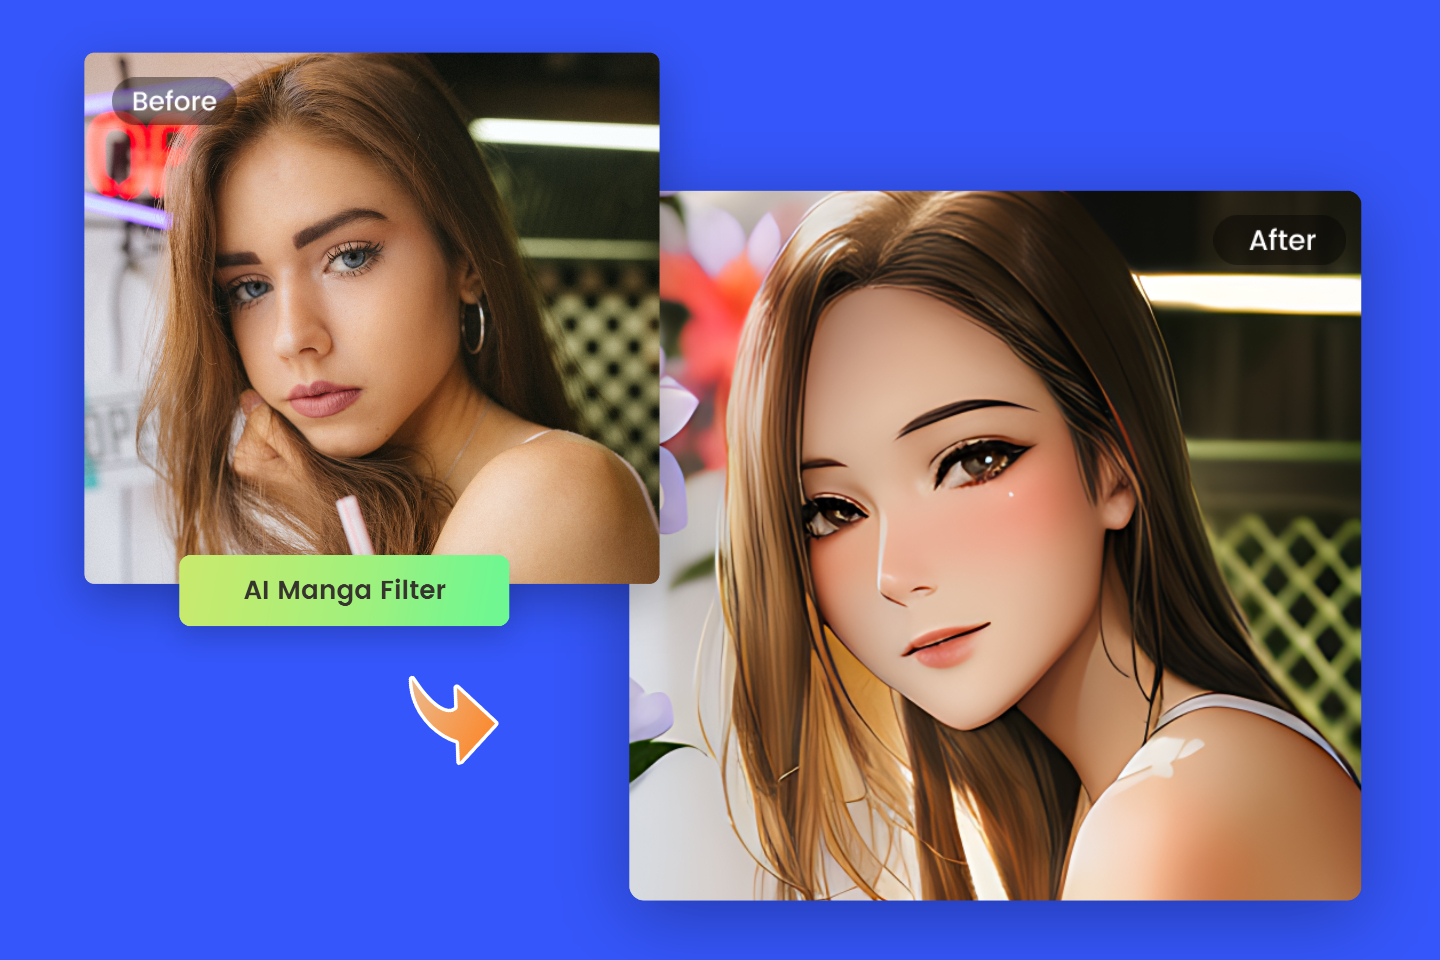 Photo to Anime Converter AI Anime Filter Online Fotor